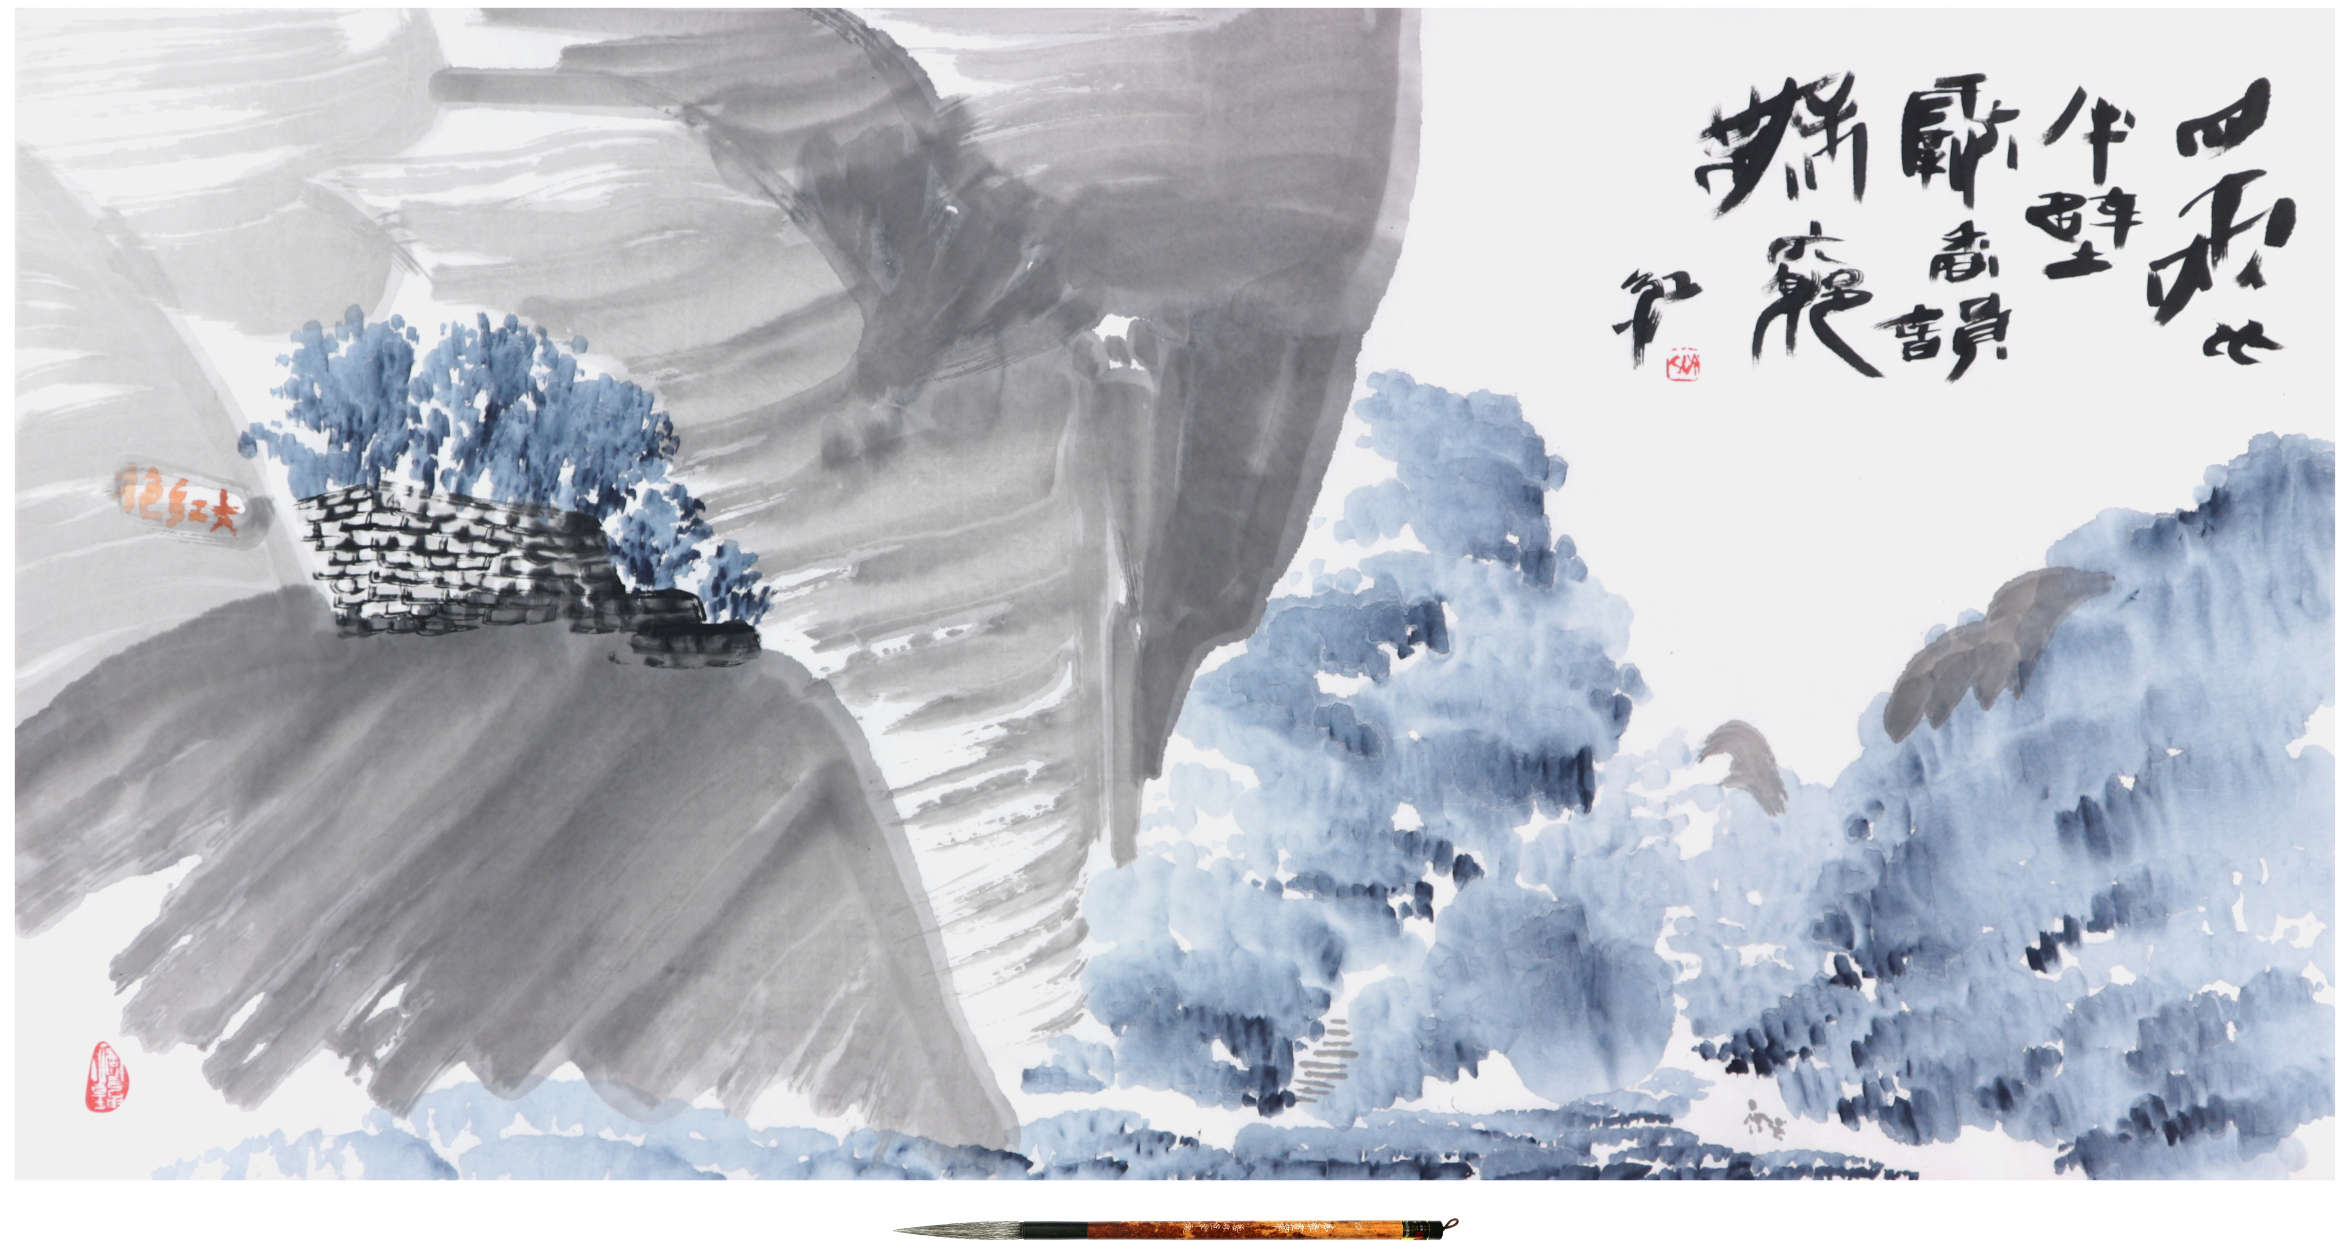 Sai Koh (Qi Hong)’s Freehand Brushwork Traditional Chinese Painting and Calligraphy on Tea: Chinese painting (landscape painting, literati painting, ink wash painting), Chinese calligraphy (semi-seal script calligraphy), Chinese seal engraving (Chinese seal carving, Chinese seal cutting) - Dahongpao Seed Trees in Mount Wuyi - ink & color on Xuan paper, 2017 - Inscriptions: 200 grams of tea occupies half of the hill wall. They exude a deep fragrance and endless charm. Koh (Hong); Chinese, 四兩比半壁 霸香韻無窮 紅 - Seal: Sai (Qi); Chinese, 齊 A Drop of Water Moistens the Universe; Chinese, 一滴潤乾坤 - Xuan Paper: Mian Liao Mian Lian, 138×69cm - Brush: Goat Hair Long Head Brush, Meng Zhang Hua Bi · Jiang